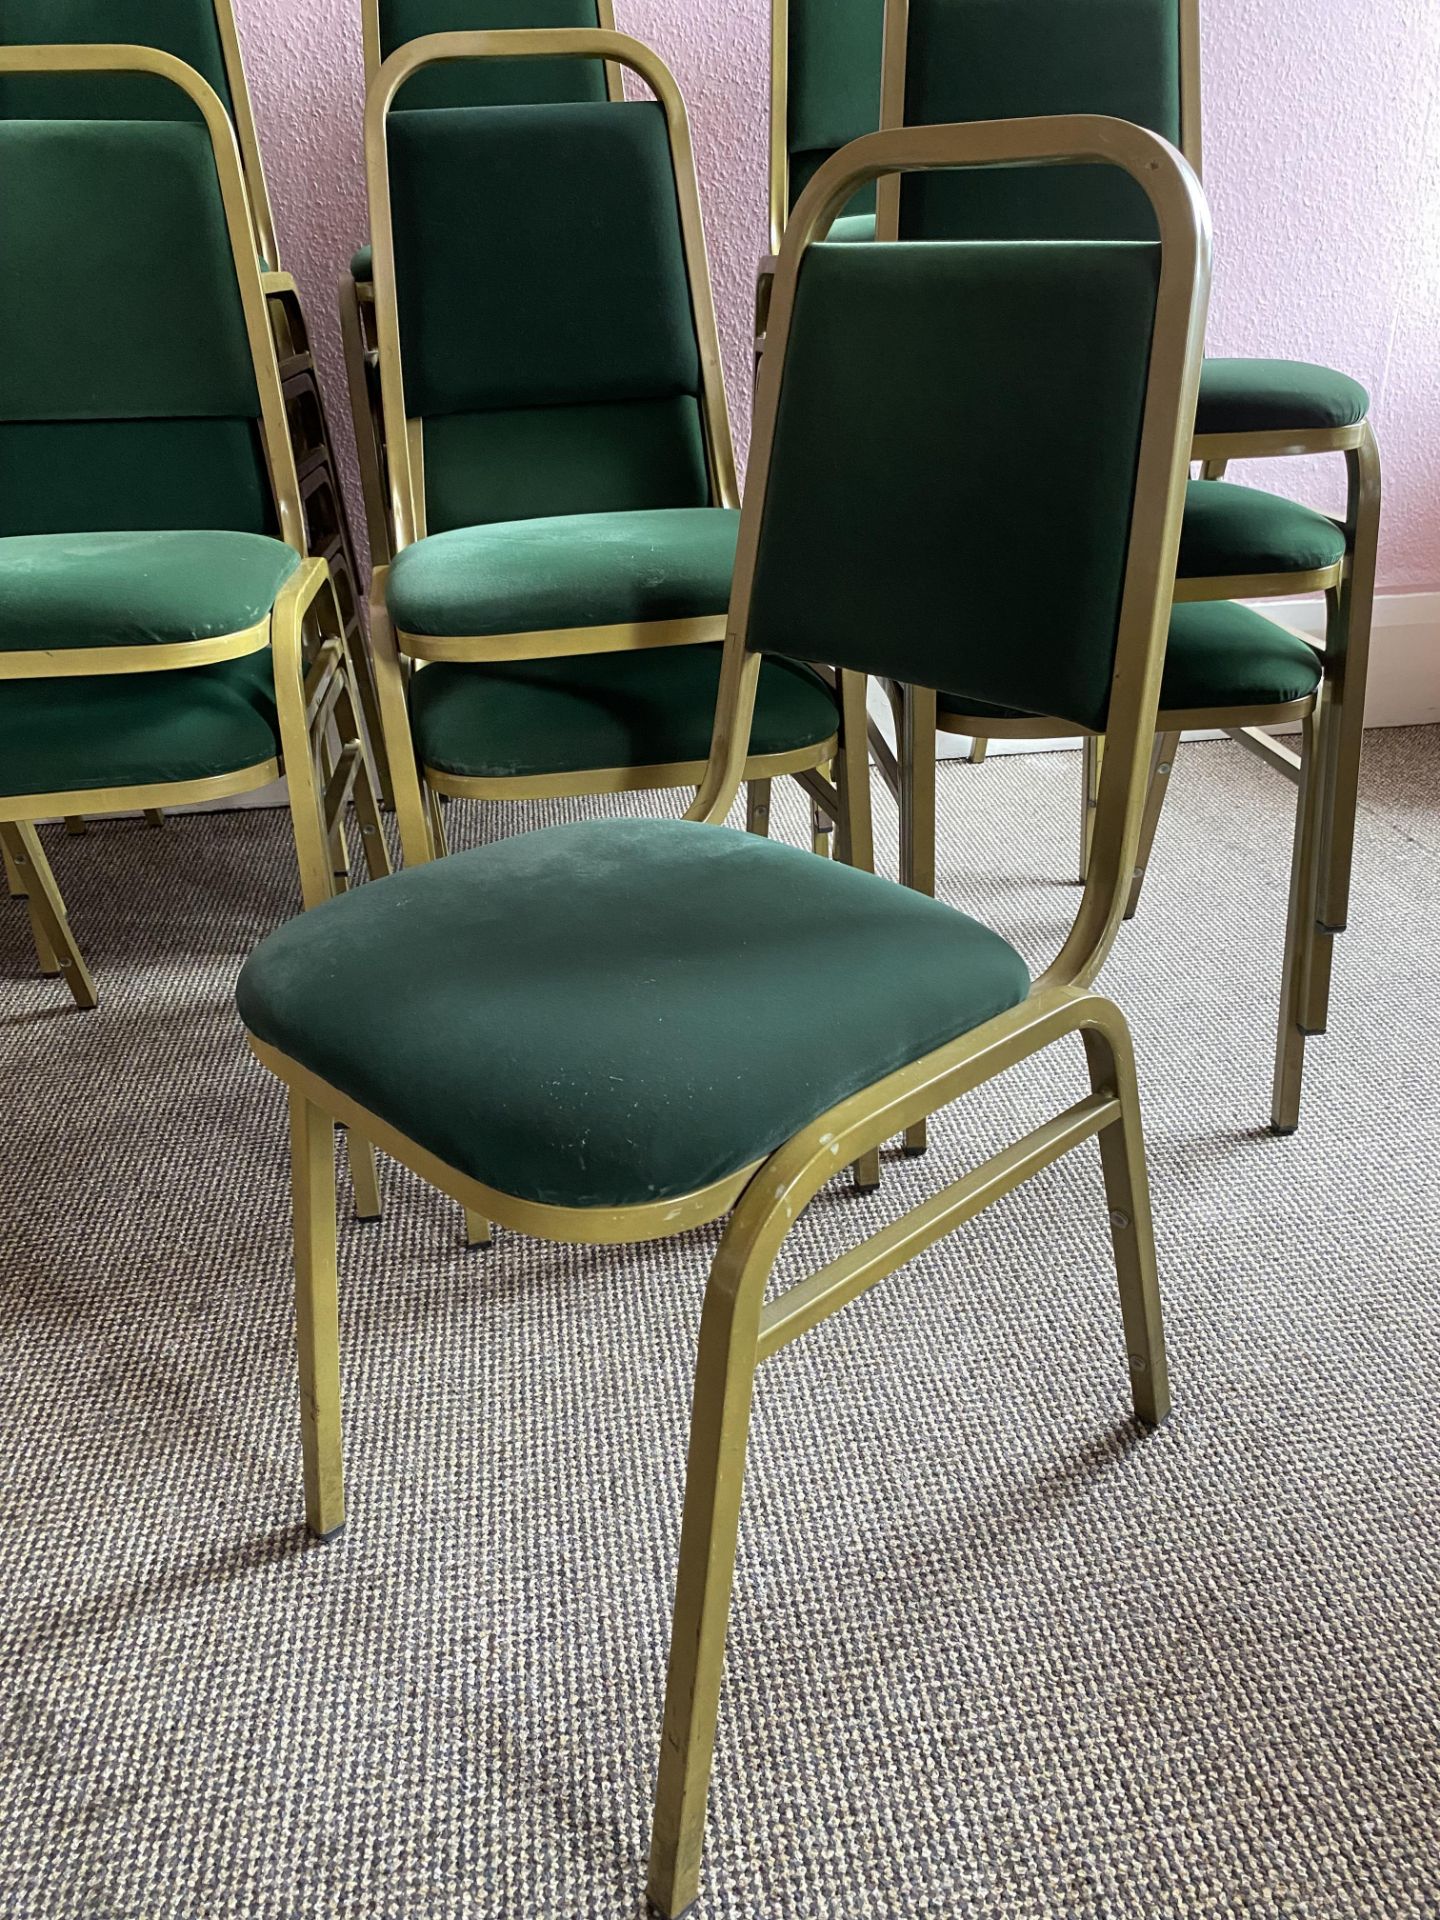 20x Gold Framed Green Upholstered Banqueting Chairs - Image 2 of 2